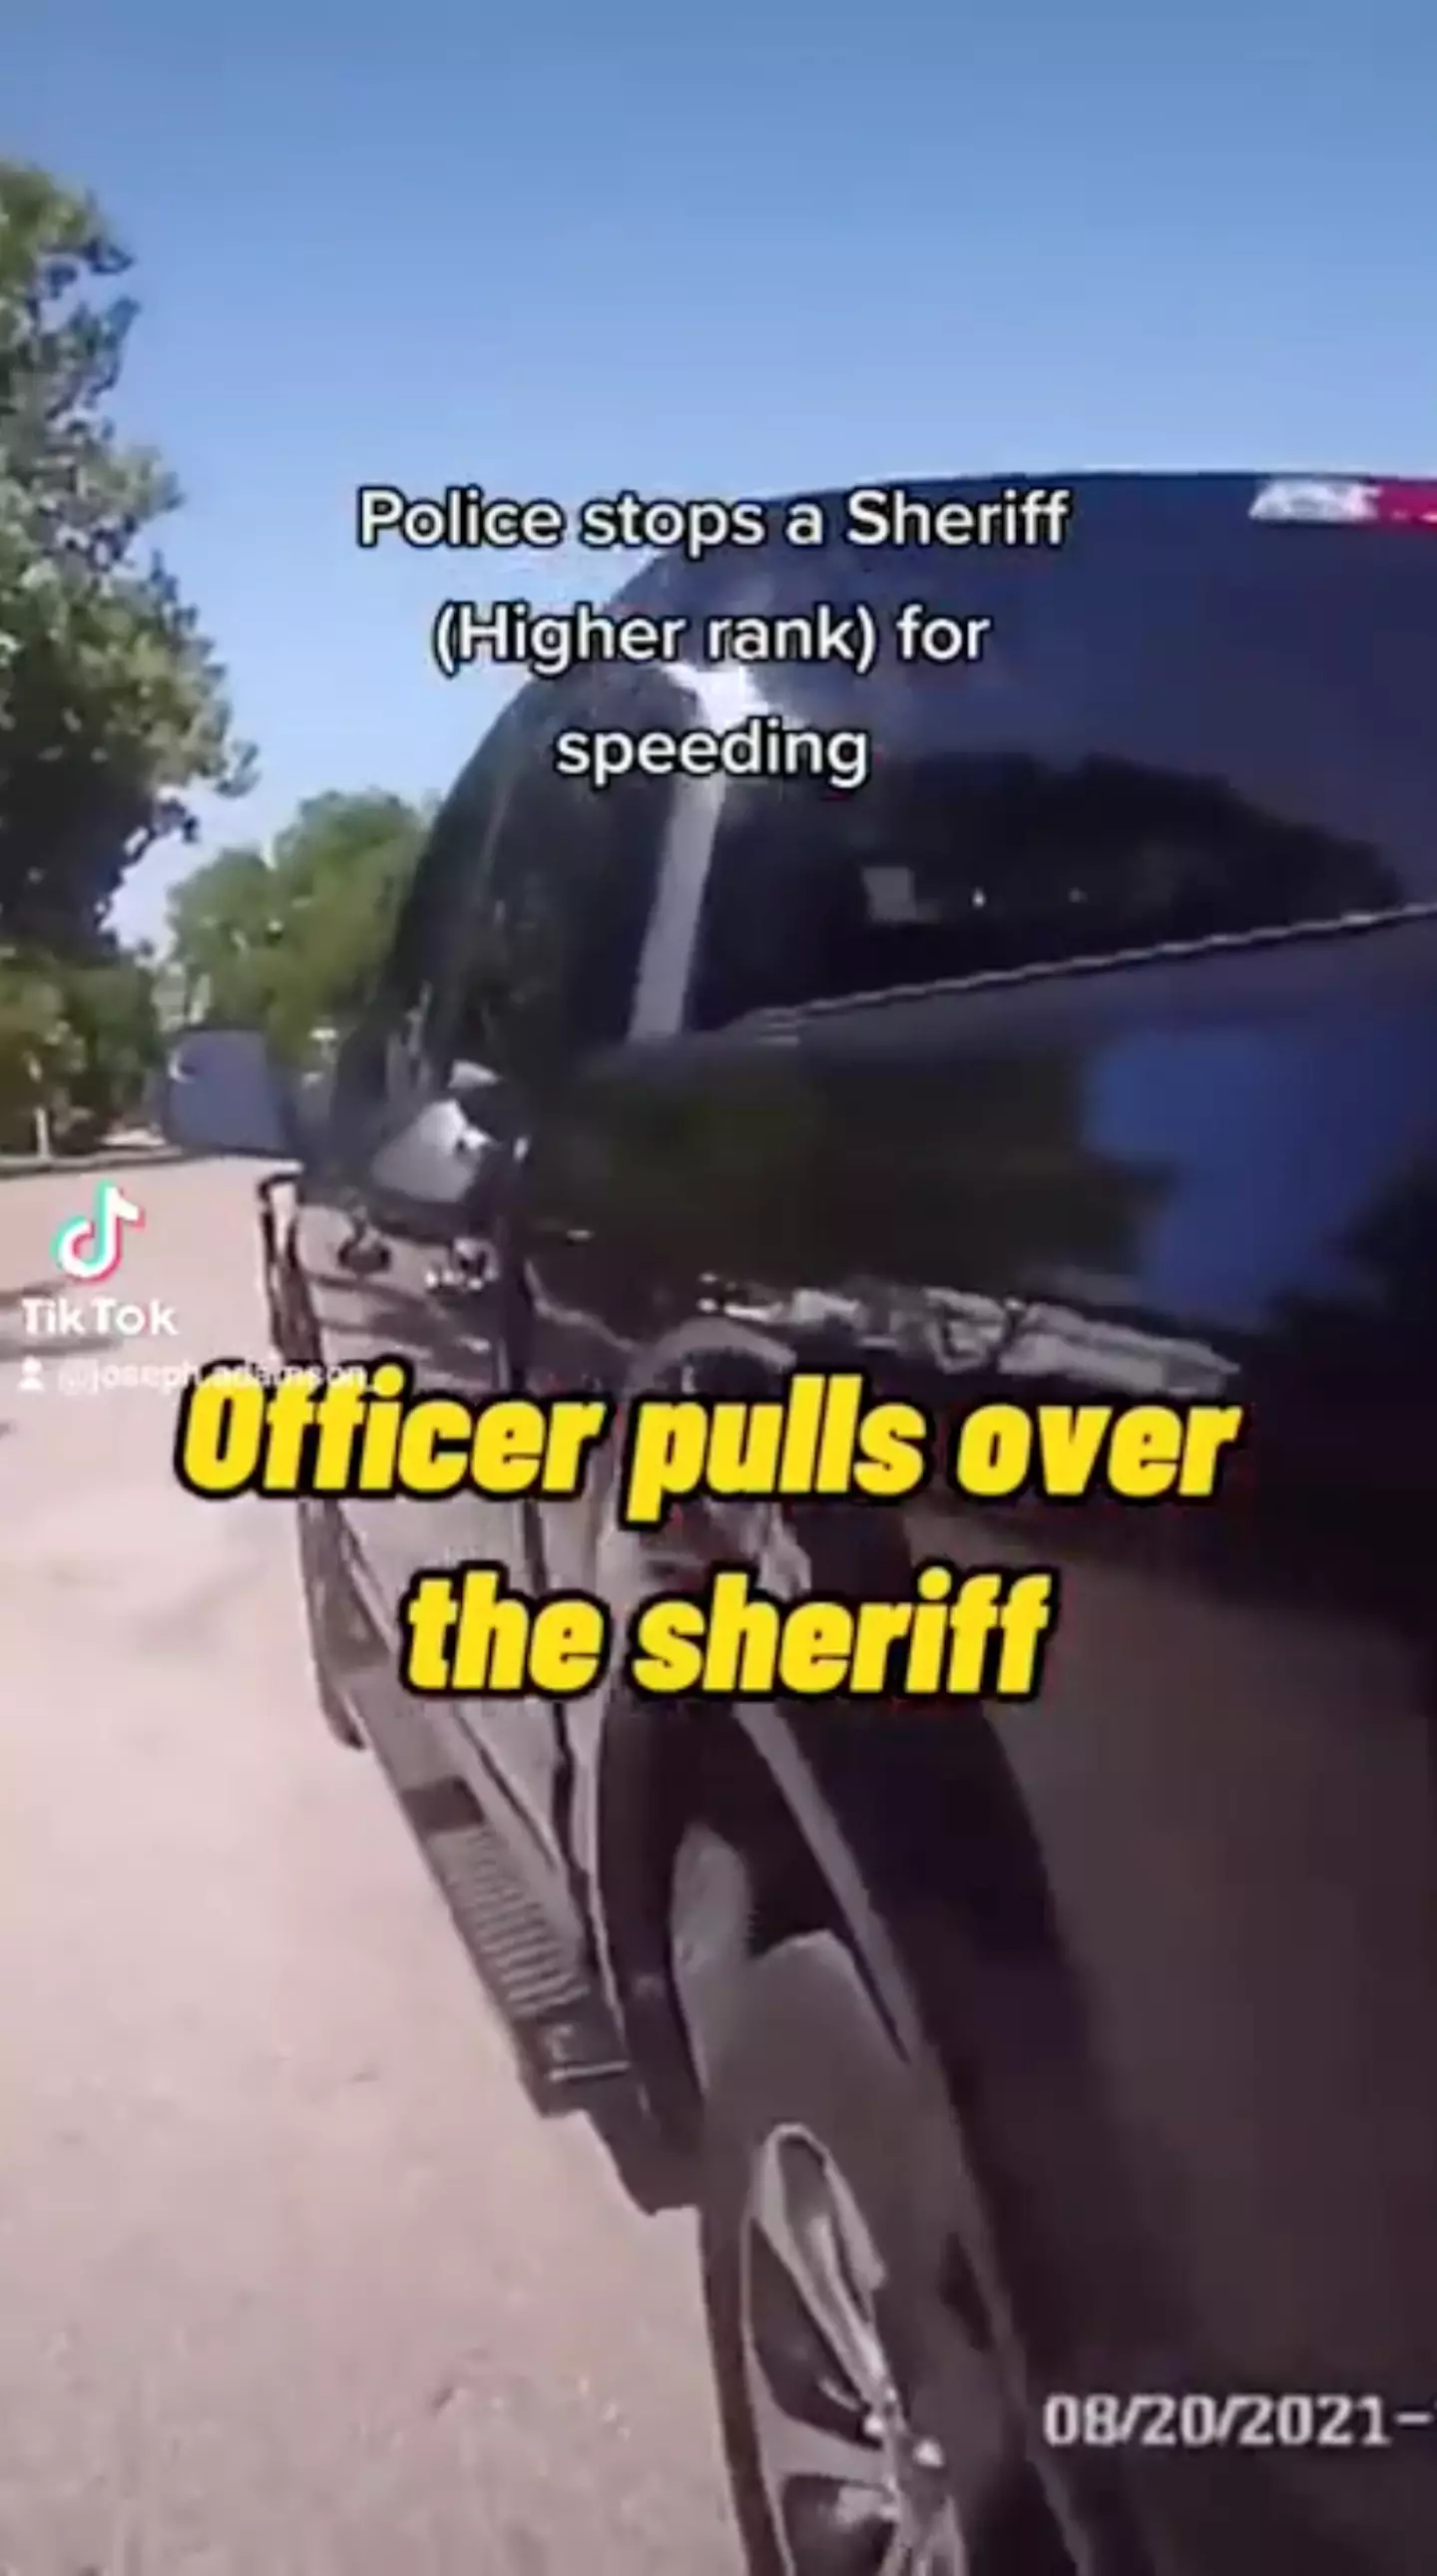 Officer Henry pulled over the unmarked black truck.